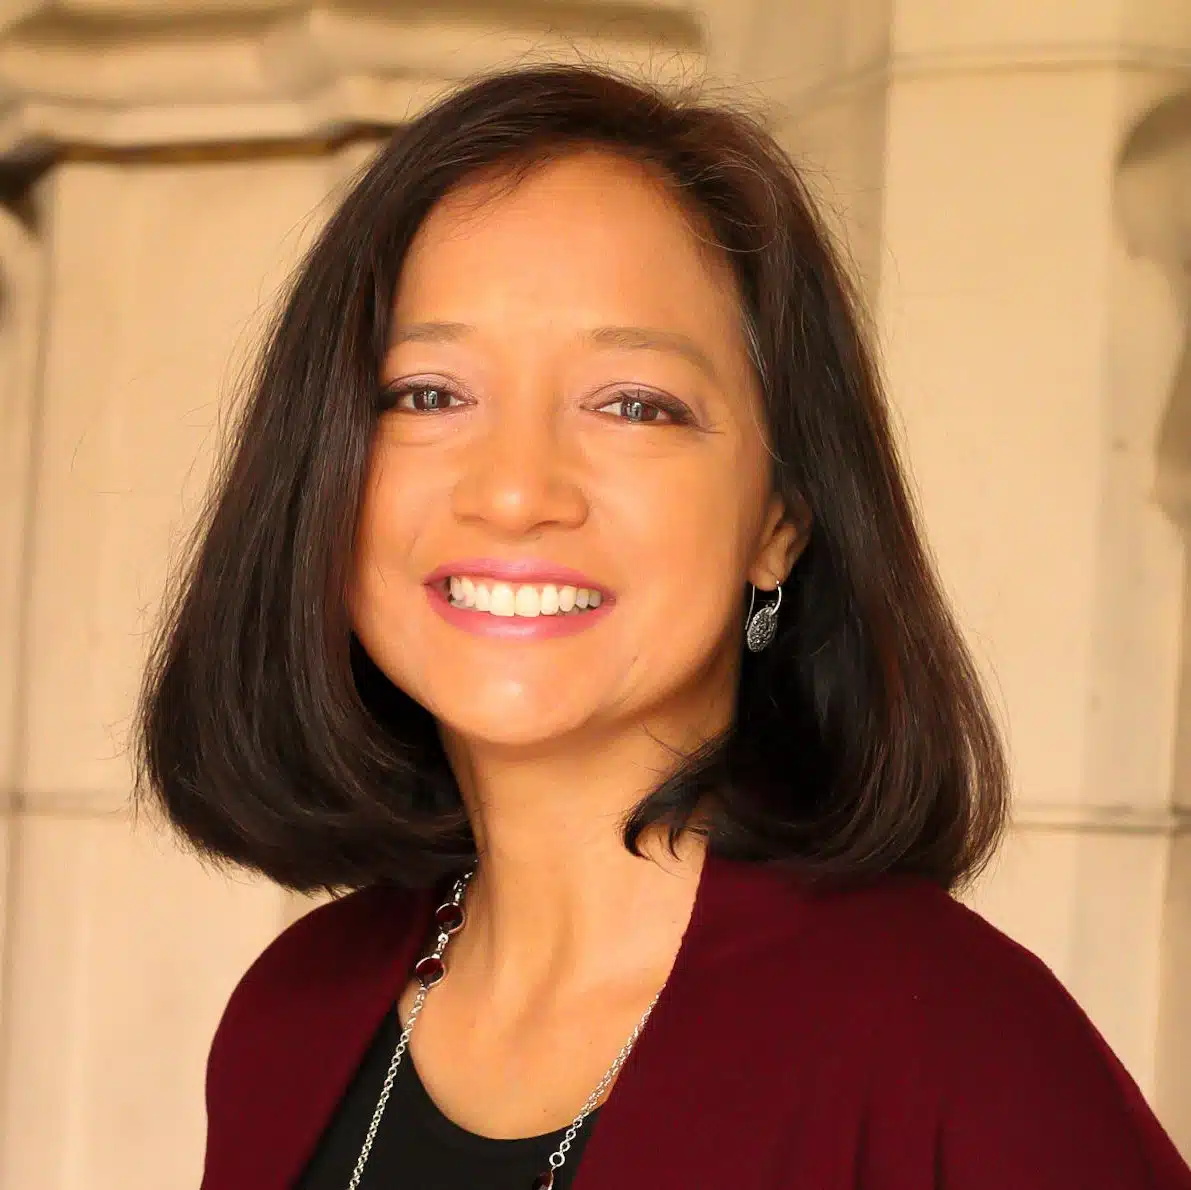 A smiling woman wearing a burgundy jacket.